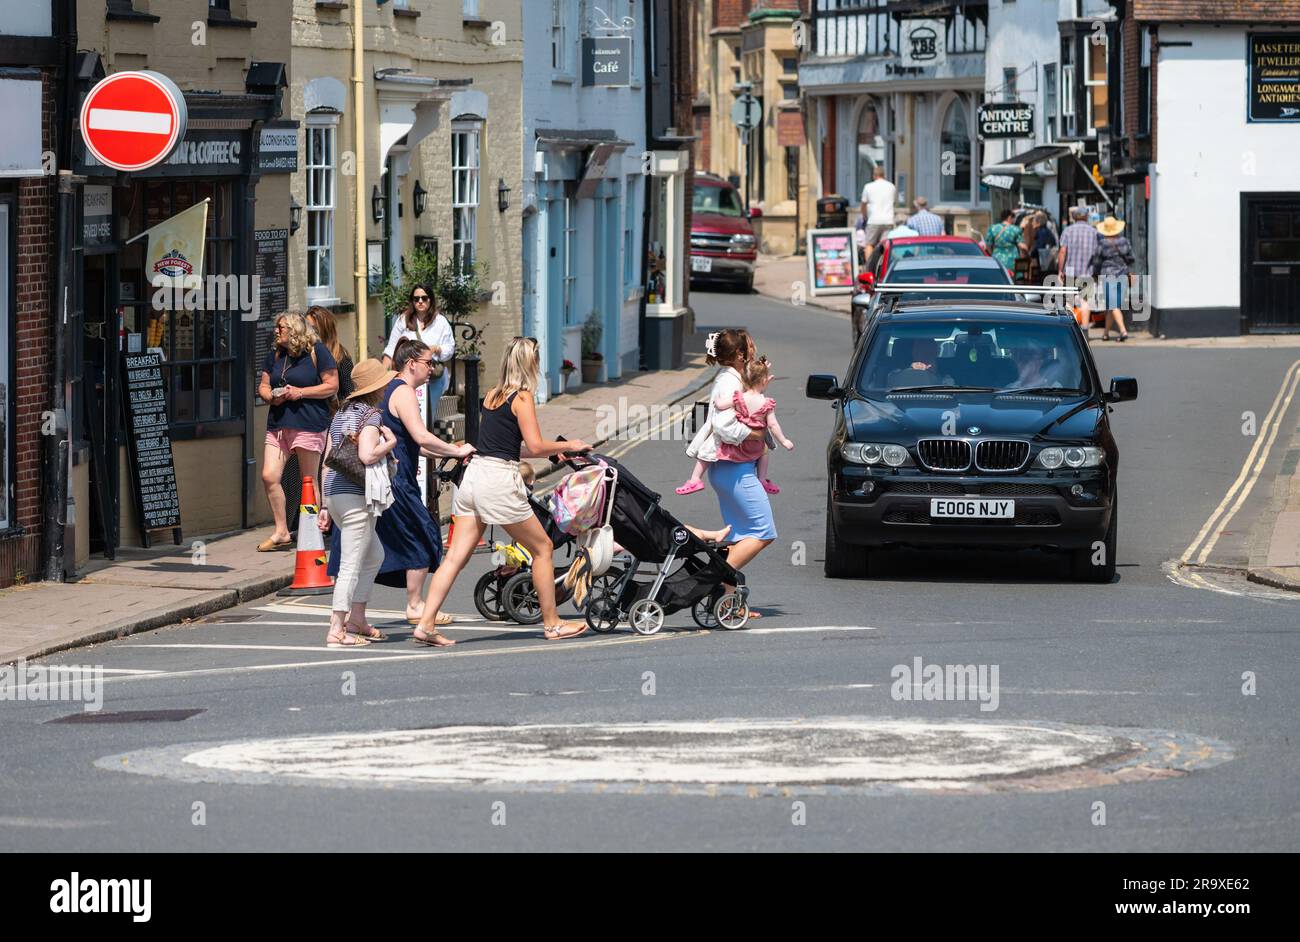 Women with children in pushchairs, presumably Mothers, pushing them across a British road while a car driver waits at a mini roundabout in England, UK Stock Photo